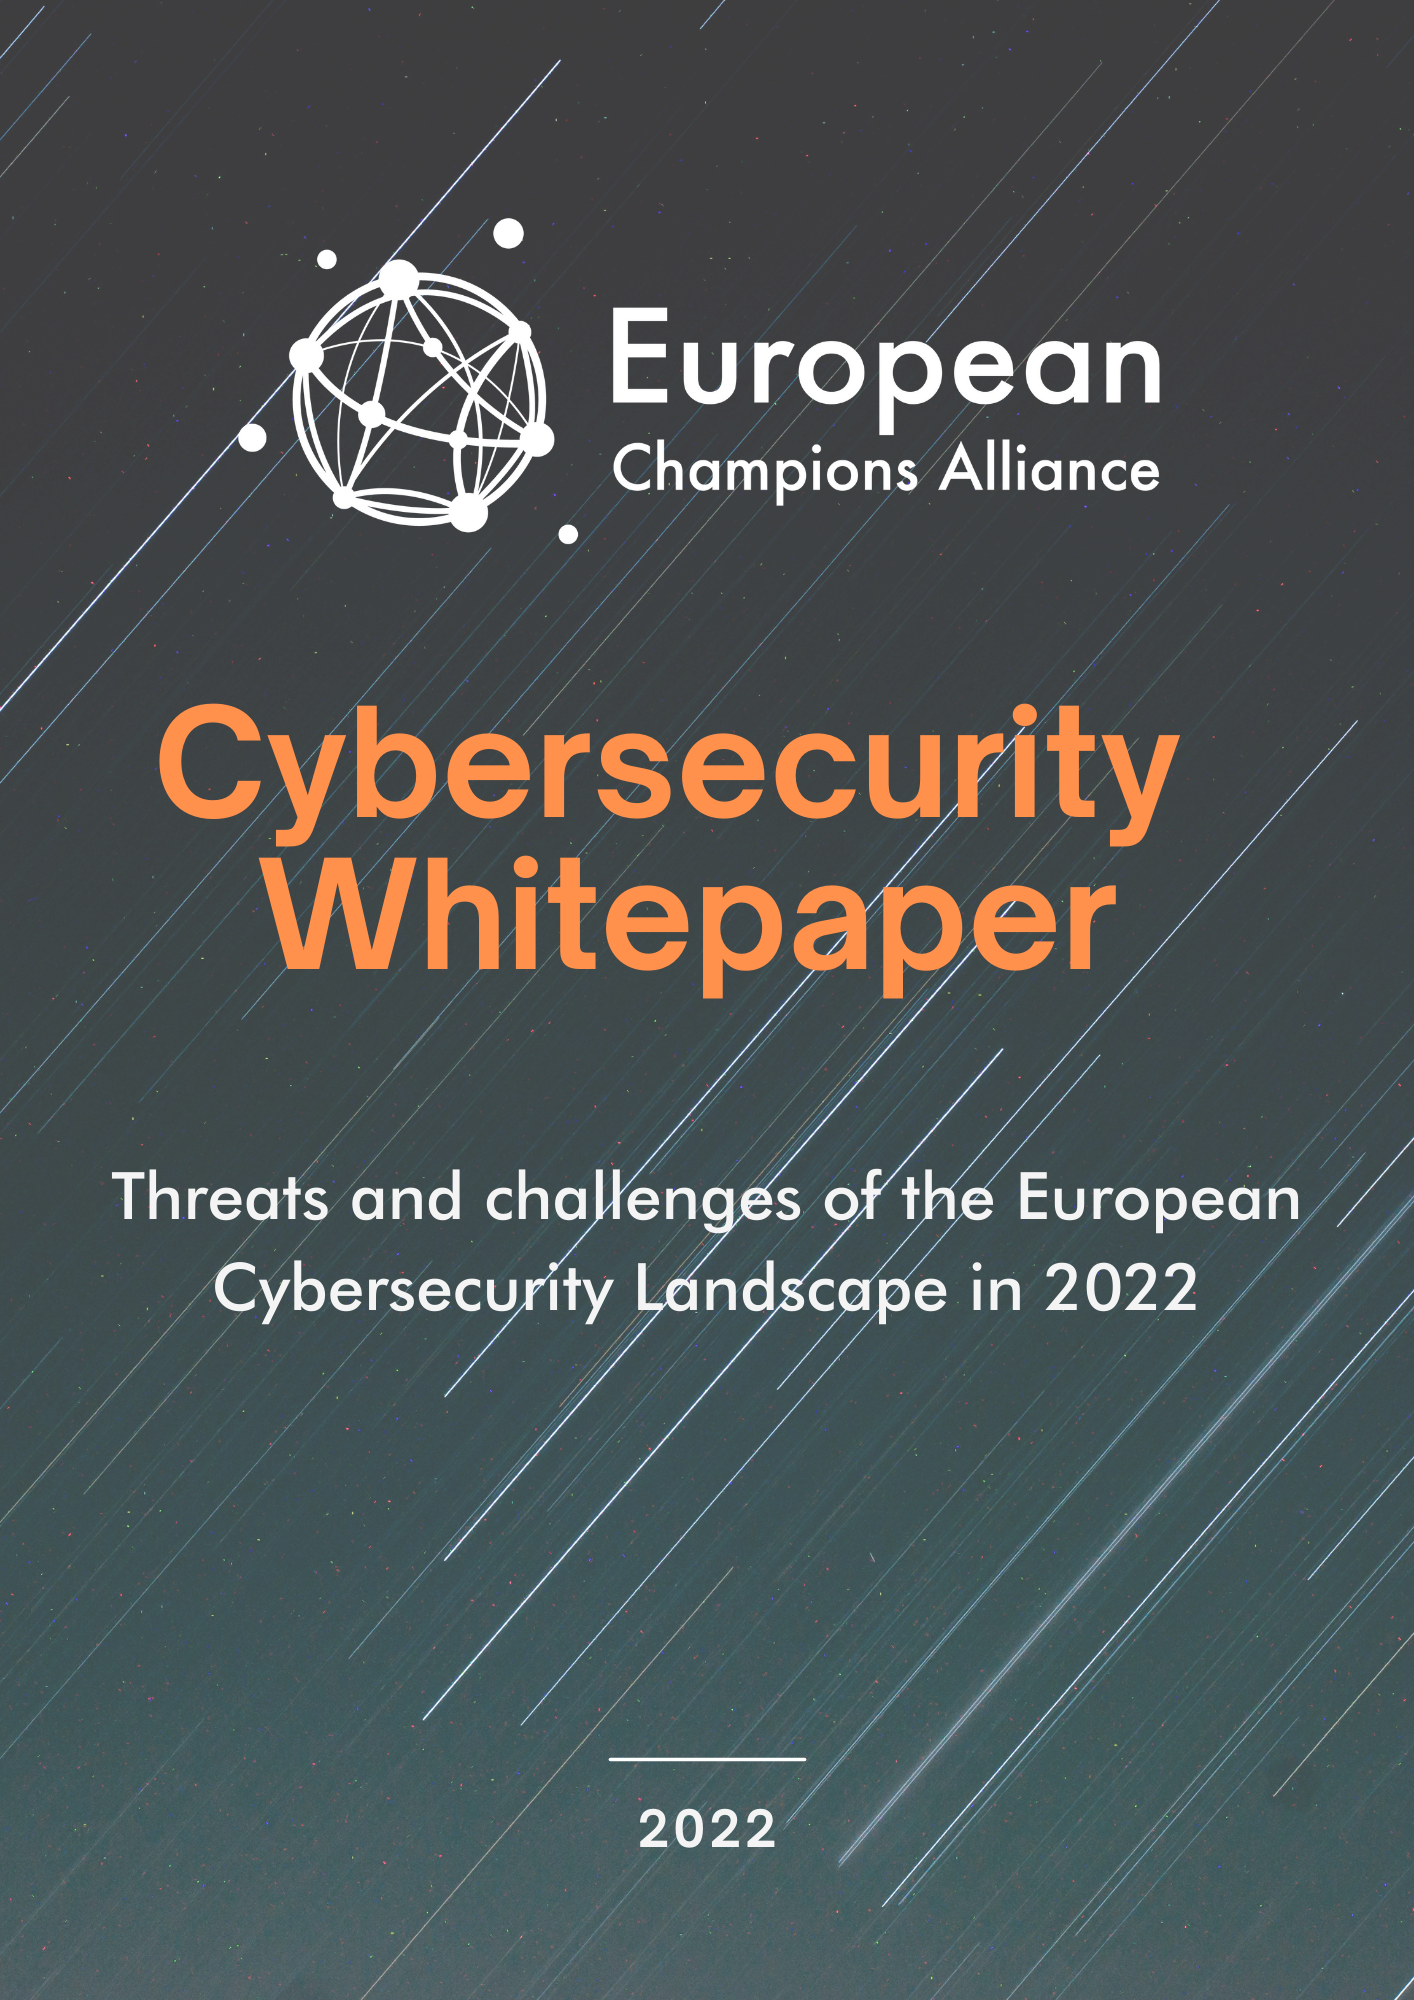 Threats and Challenges of the European Cybersecurity Landscape